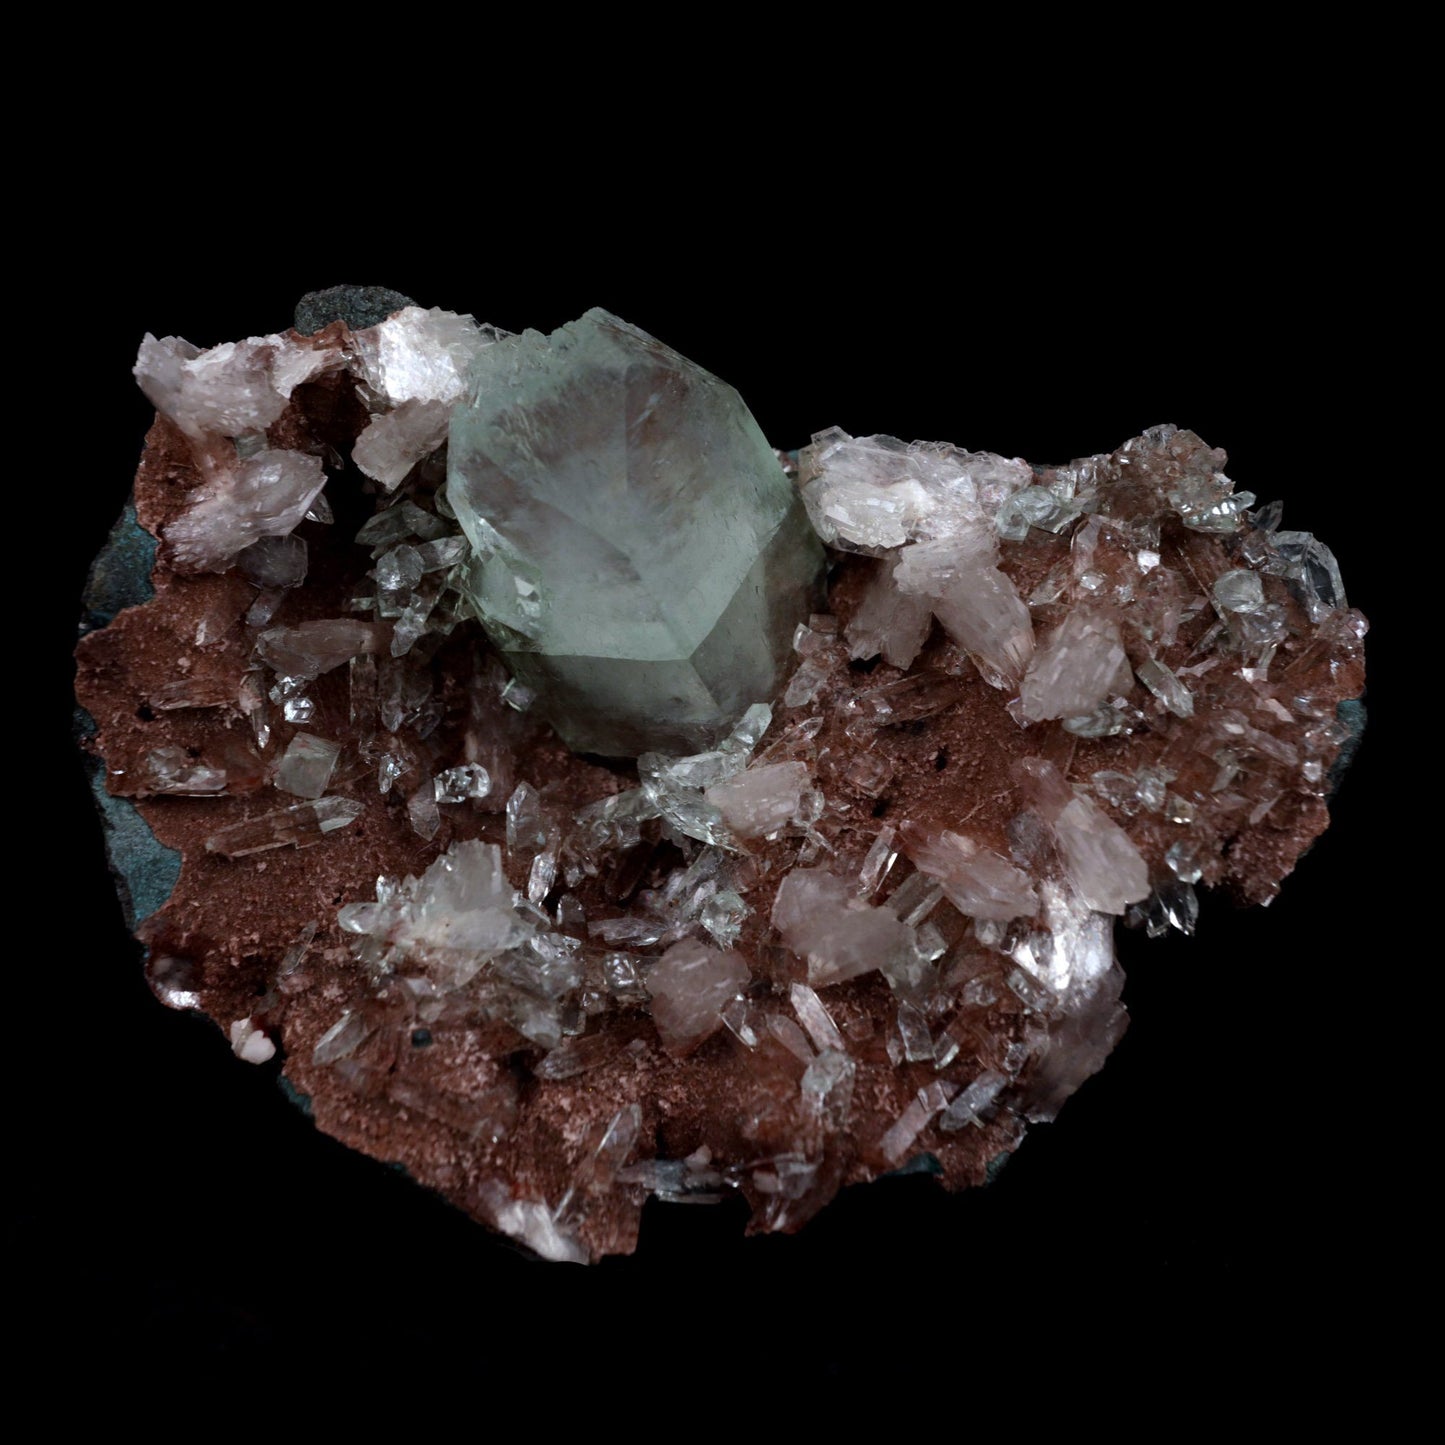 Fluorapophyllite with Stilbite on Chalcedony Natural Mineral Specimen …  https://www.superbminerals.us/products/fluorapophyllite-with-stilbite-on-chalcedony-natural-mineral-specimen-b-4789  Features: On this excellent enormous combination from this important Jalgaon location, a beautiful, huge, blocky bi-hued tetragonal apophyllite is dramatically framed by light peach coloured stilbites.The eye-catching glassy, translucent cube features a rich mint-green body, a scalloped sparkling white termination